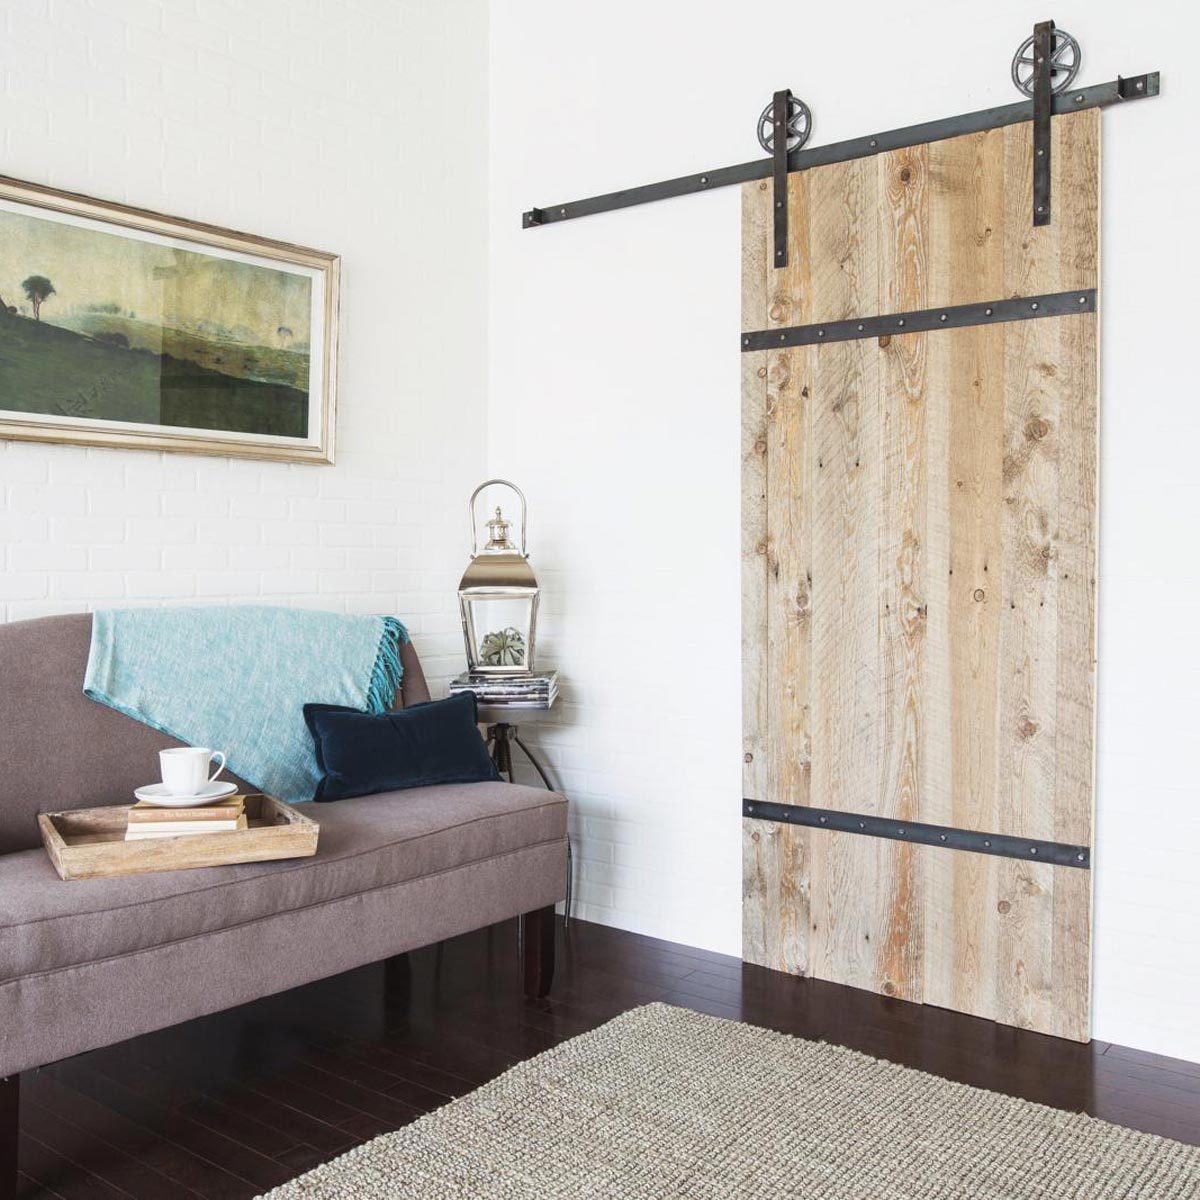 How To Build A Simple Rustic Barn Door The Family Handyman